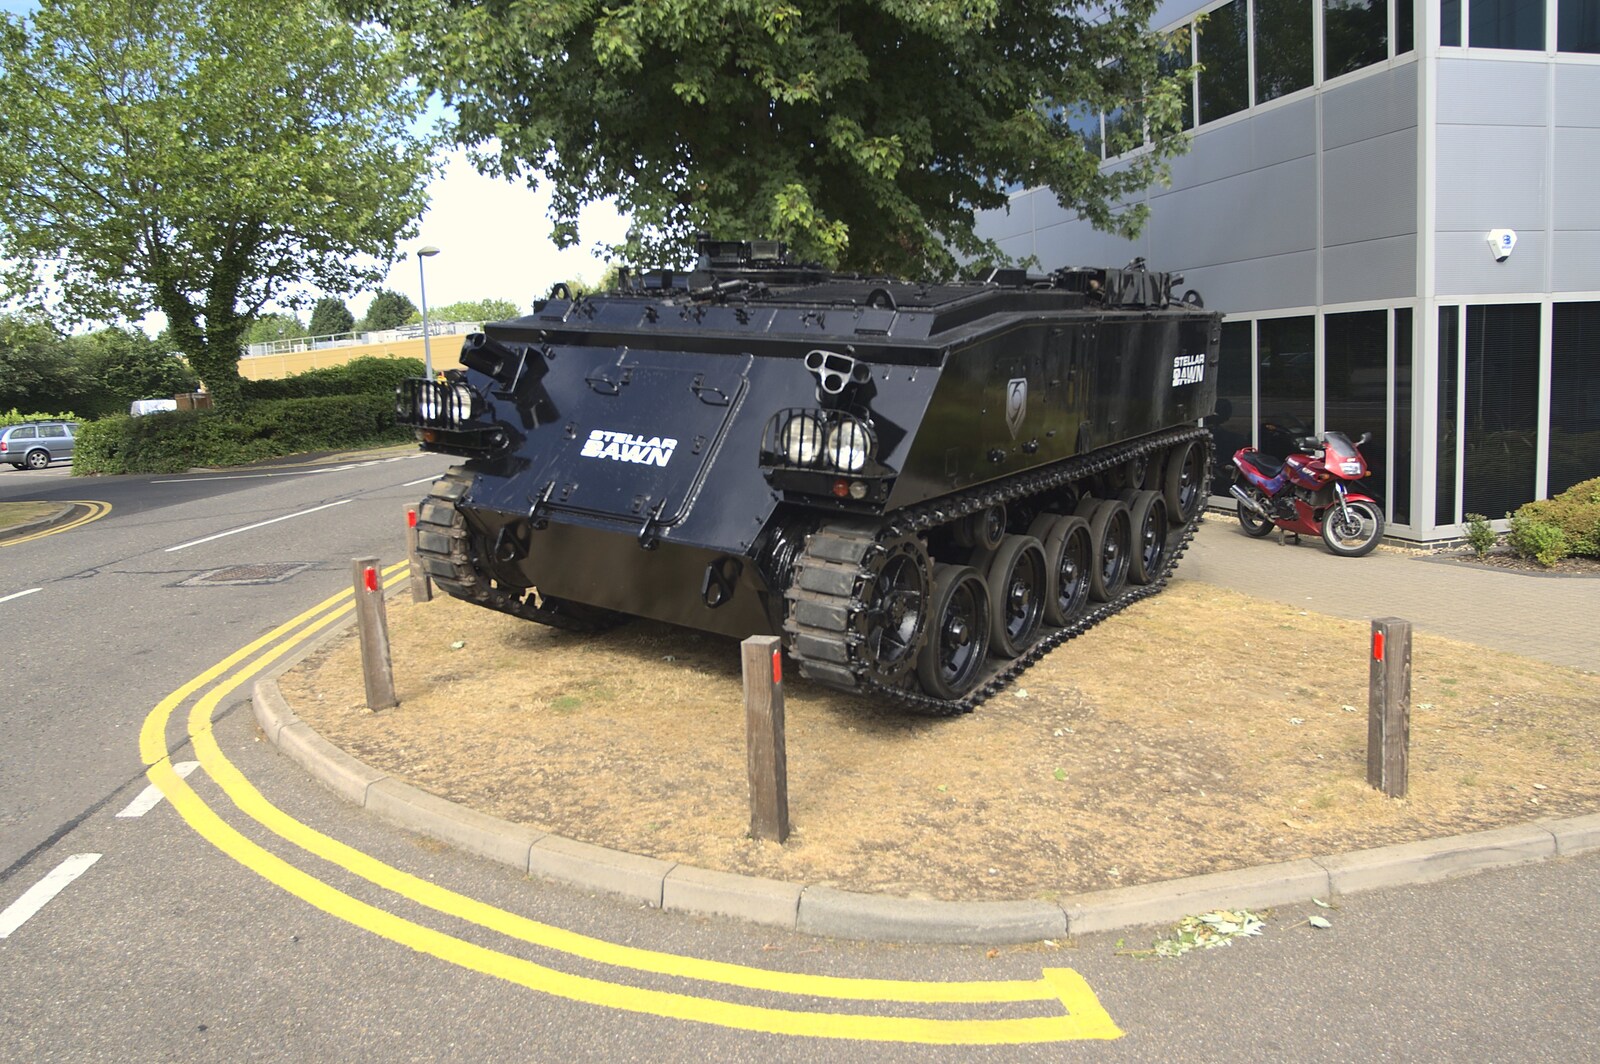 An armoured personnel carrier appears outside the office from The Fifth Latitude Festival, Henham Park, Suffolk - 16th July 2010